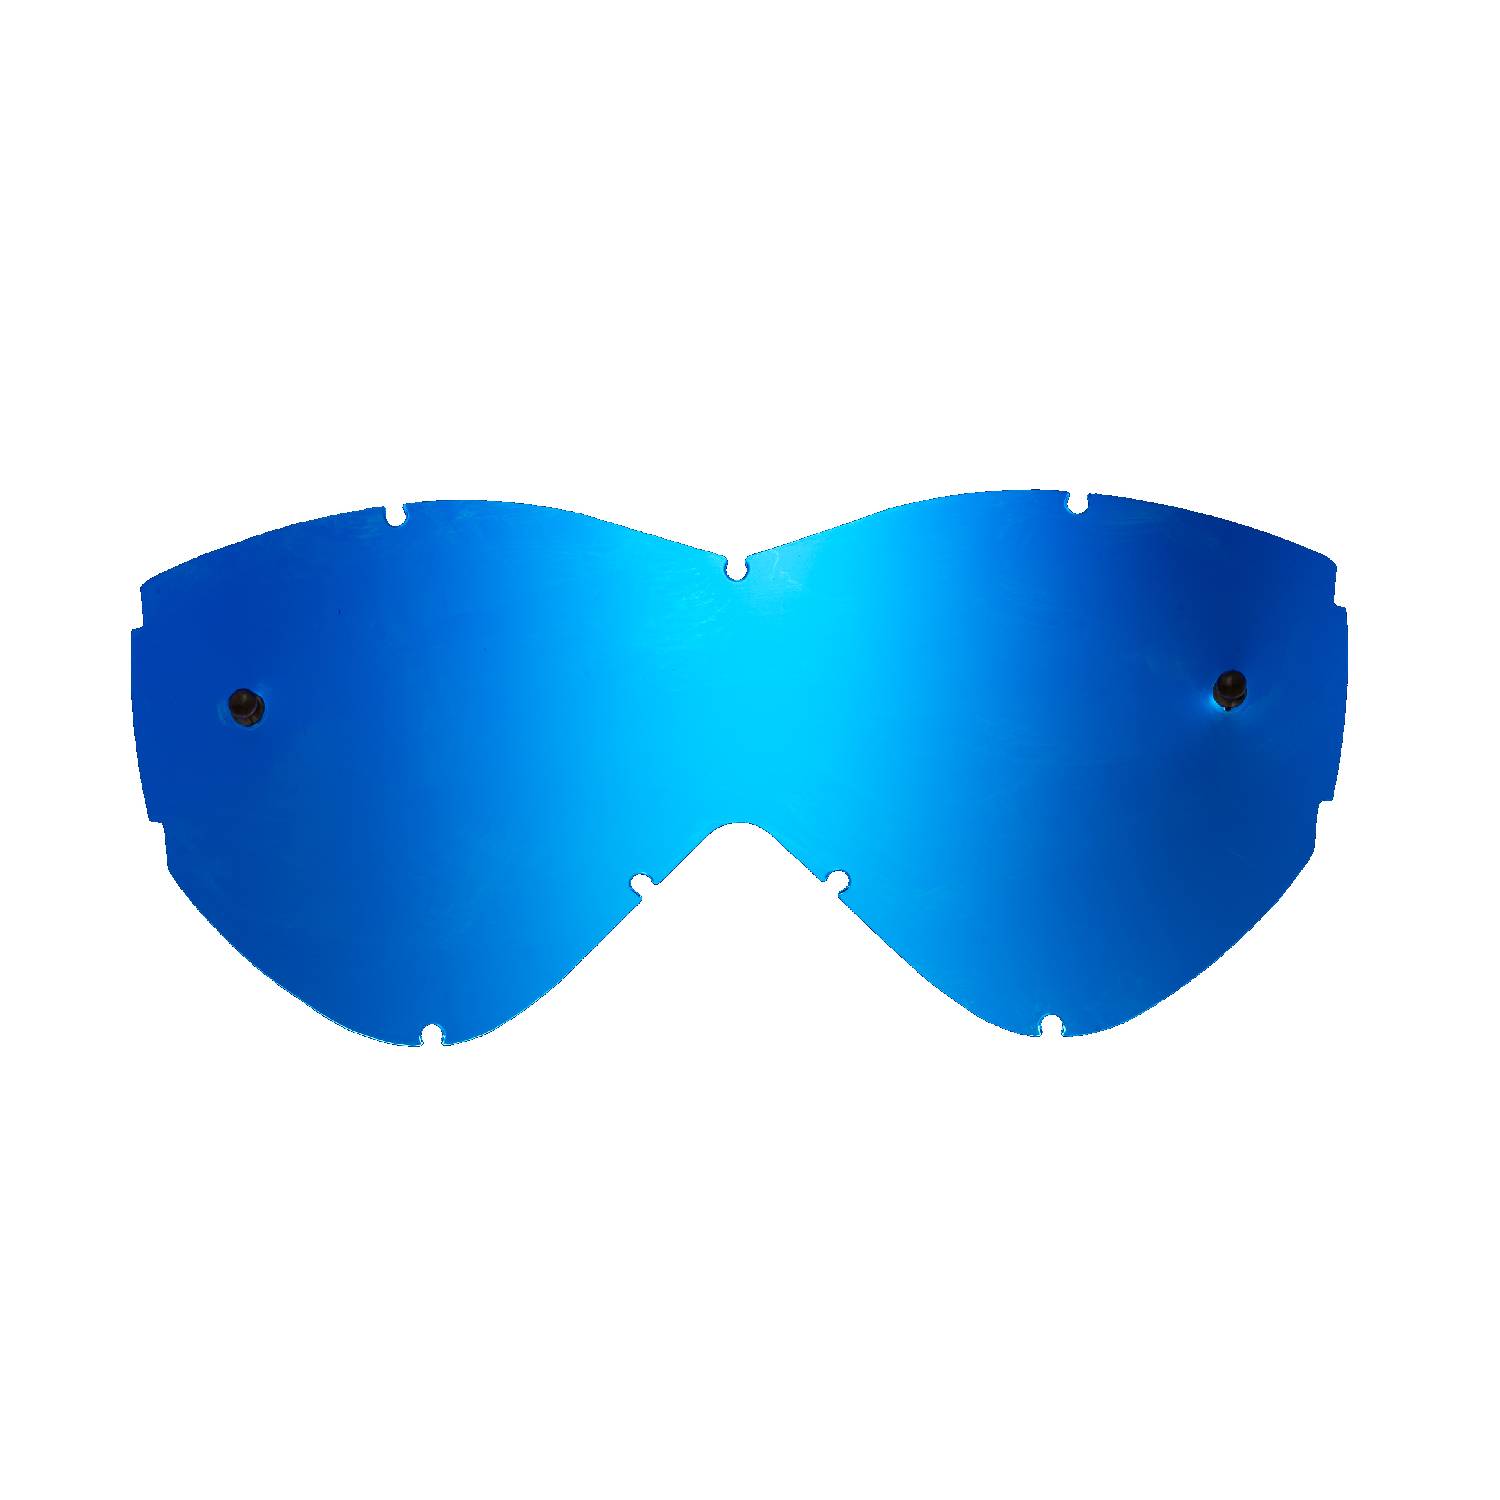 blue-toned mirrored replacement lenses for goggles compatible for Smith Warp goggle